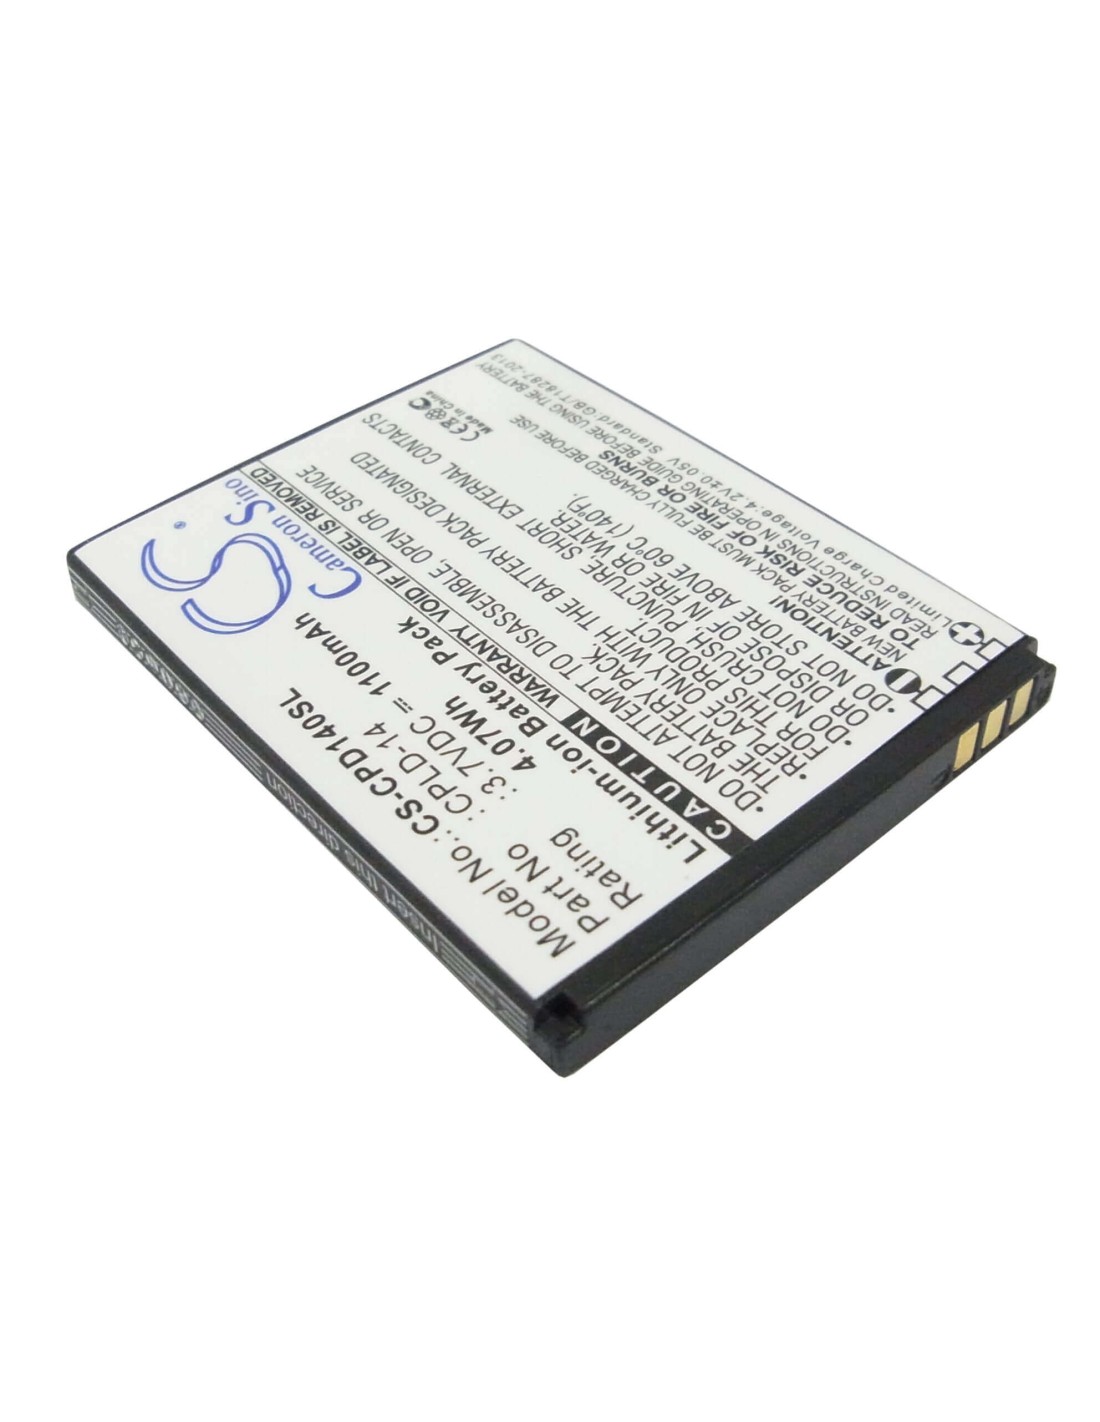 Battery for Coolpad 8150D, 8150S 3.7V, 1100mAh - 4.07Wh